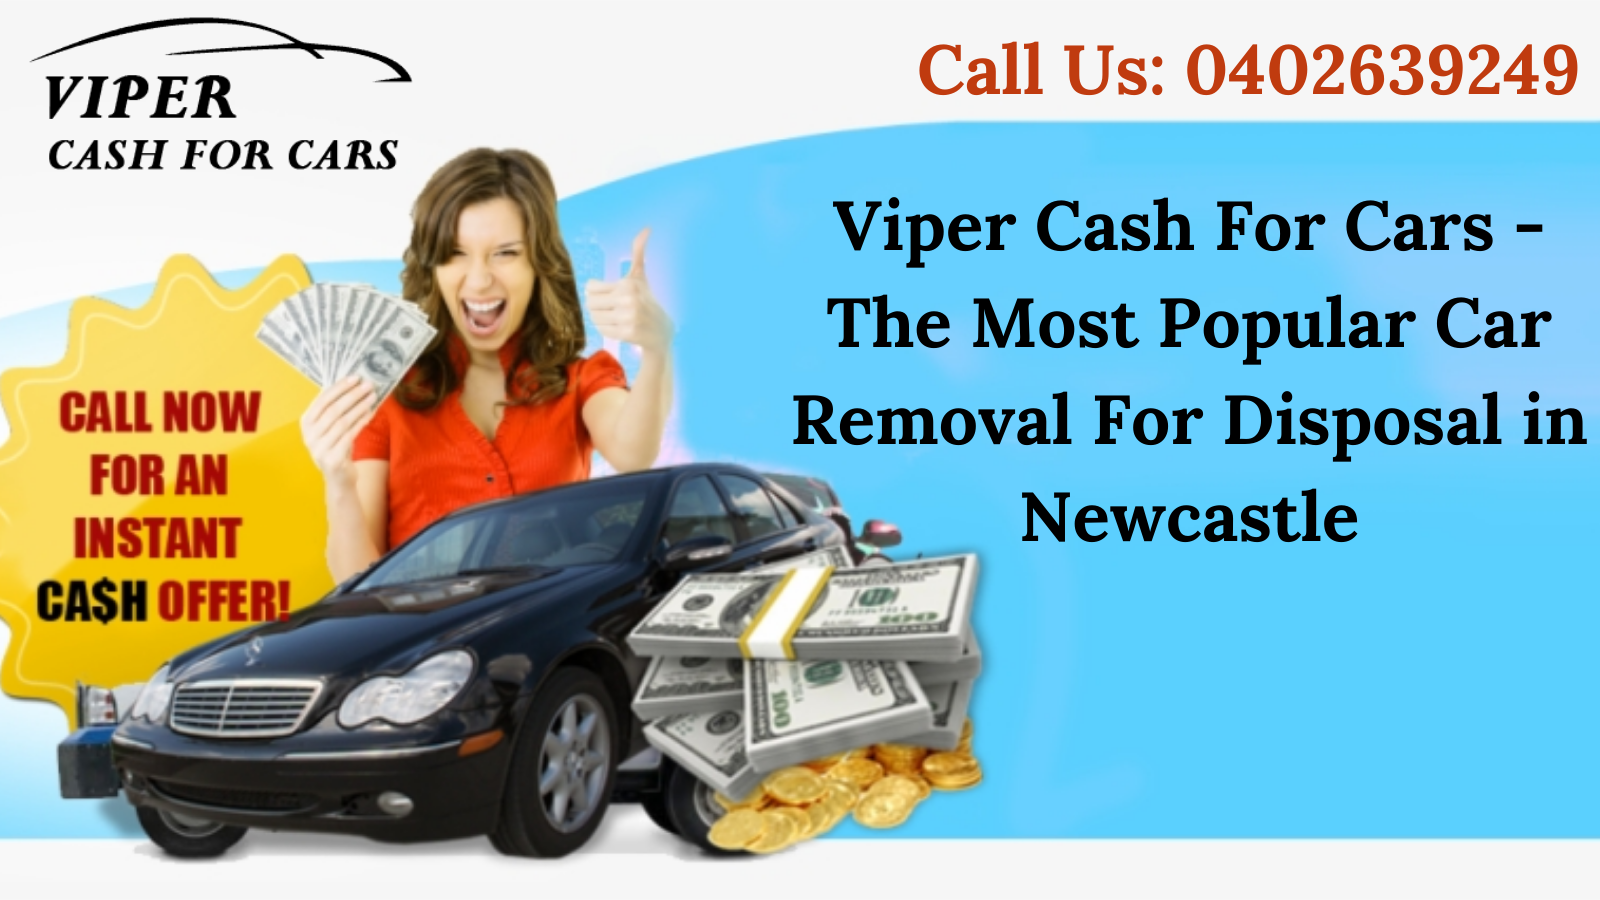 The Most Popular Car Removal For Disposal in Newcastle